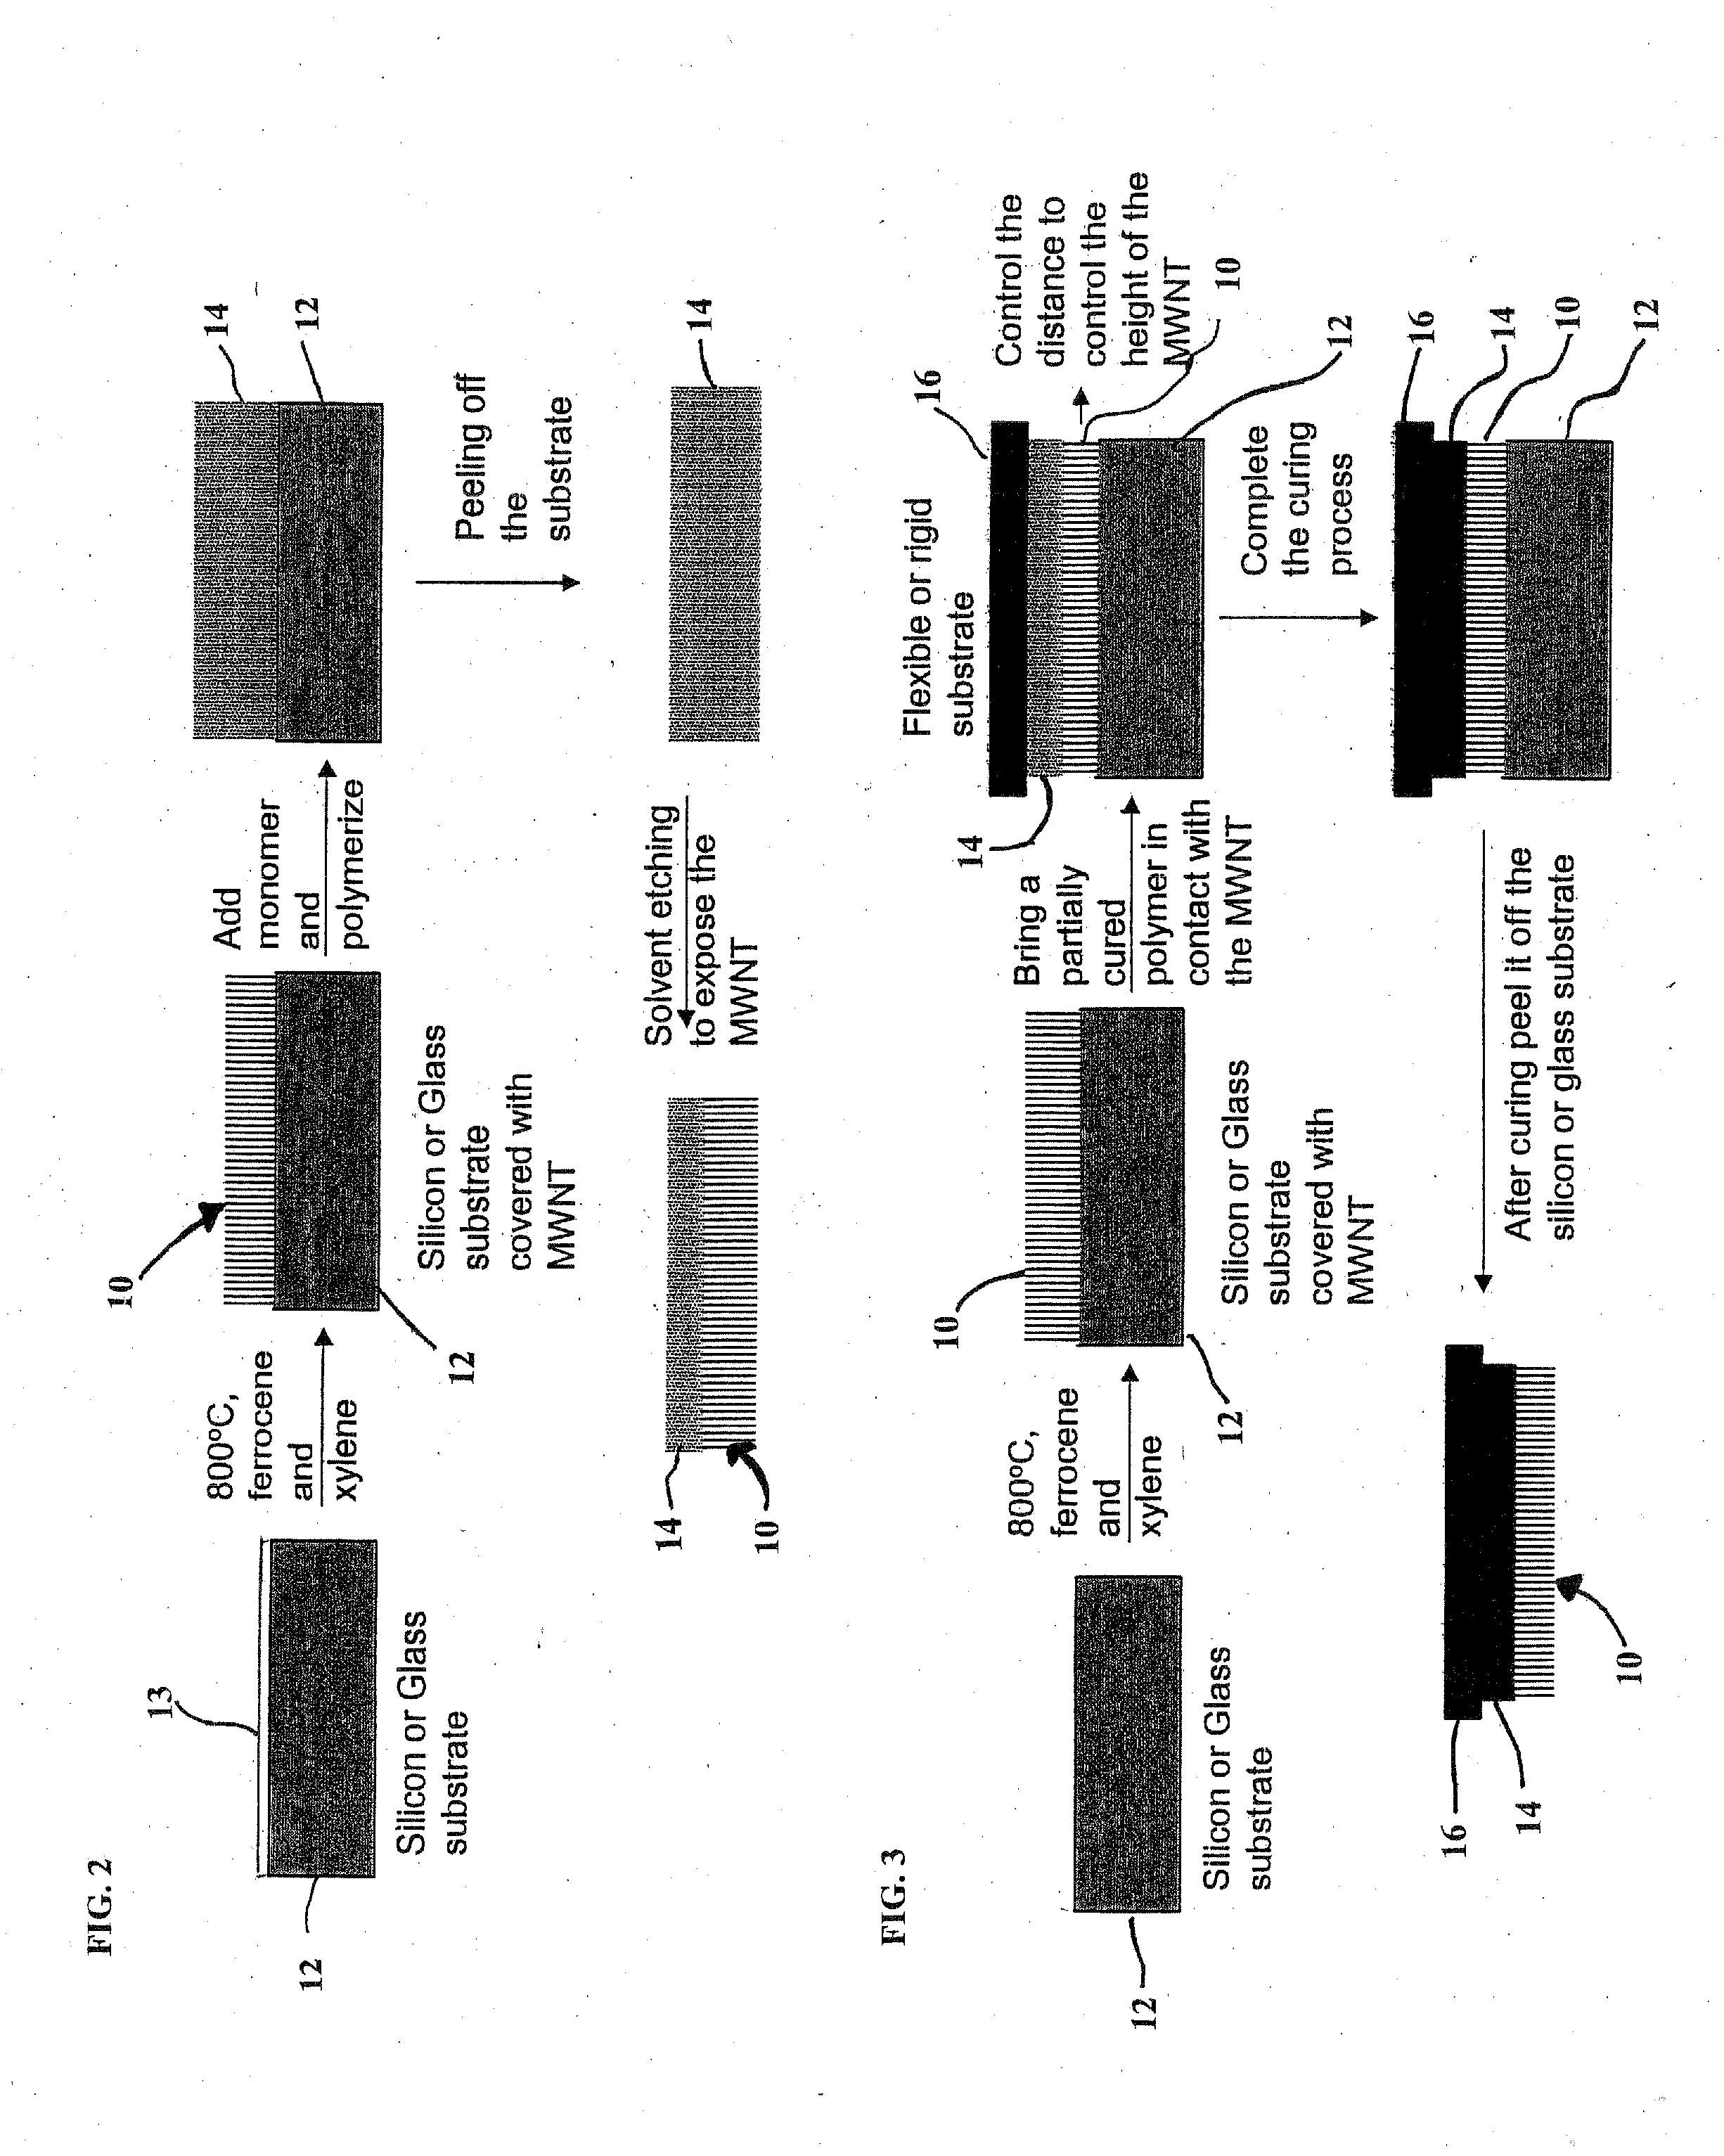 Aligned Carbon Nanotube-Polymer Materials, Systems and Methods